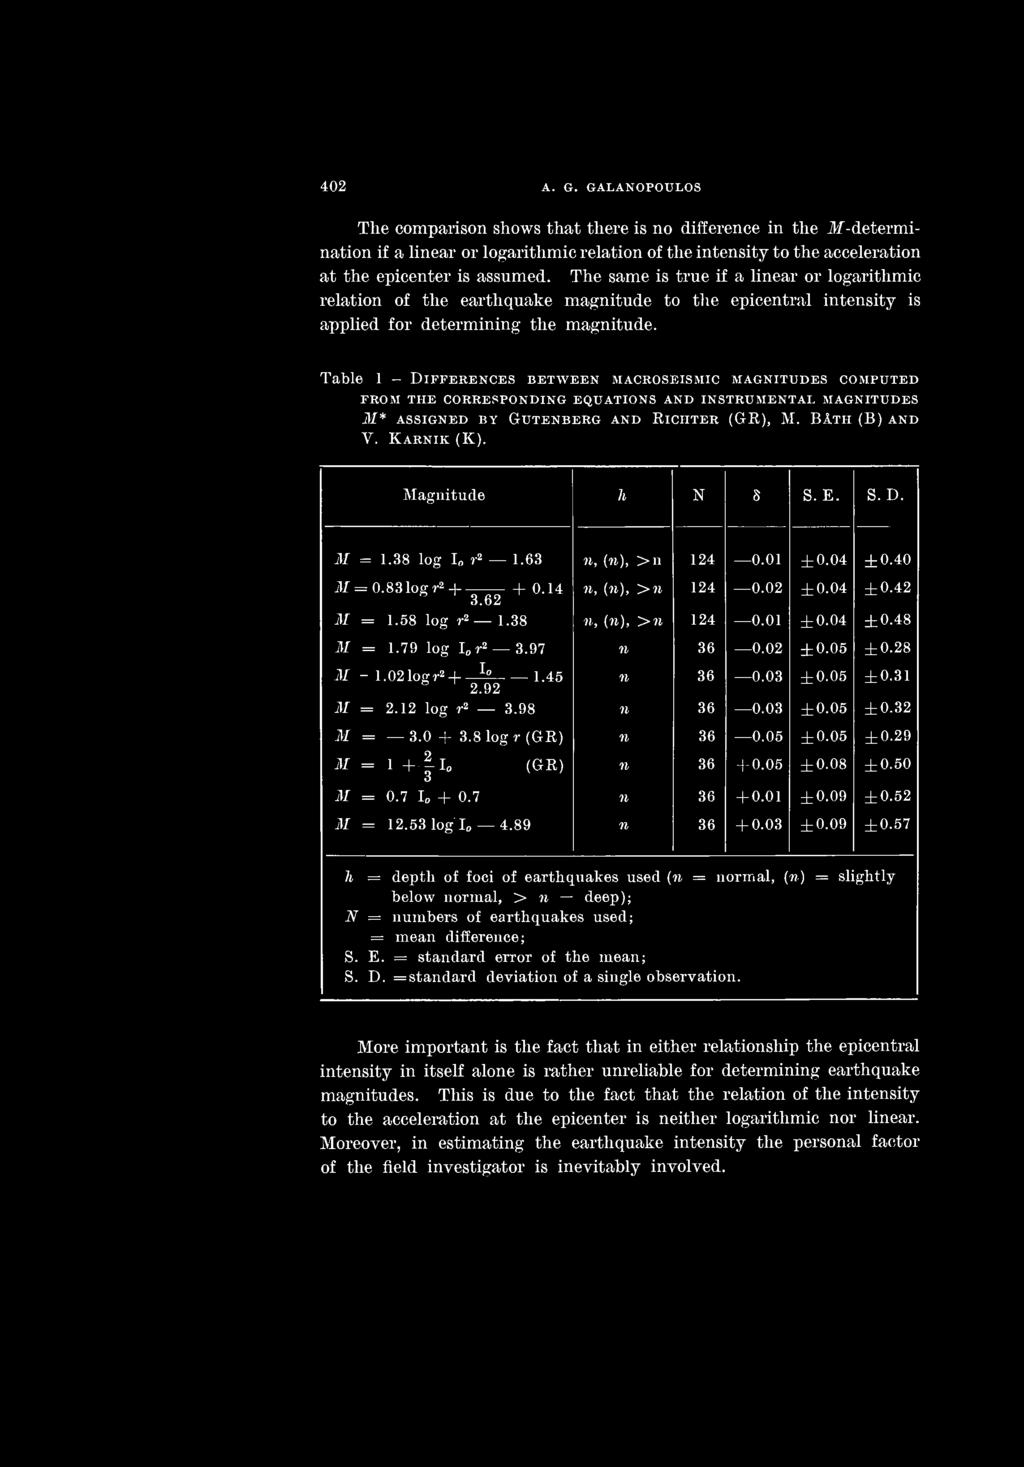 Table 1 - DIFFERENCES BETWEEN MACROSEISMIC MAGNITUDES COMPUTED FROM THE CORRESPONDING EQUATIONS AND IN STRUMENTAI. MAGNITUDES M* ASSIGNED BY GUTENBERG AND RLCIITER (GR), M. BATH (B) AND V. KARNIK (K).